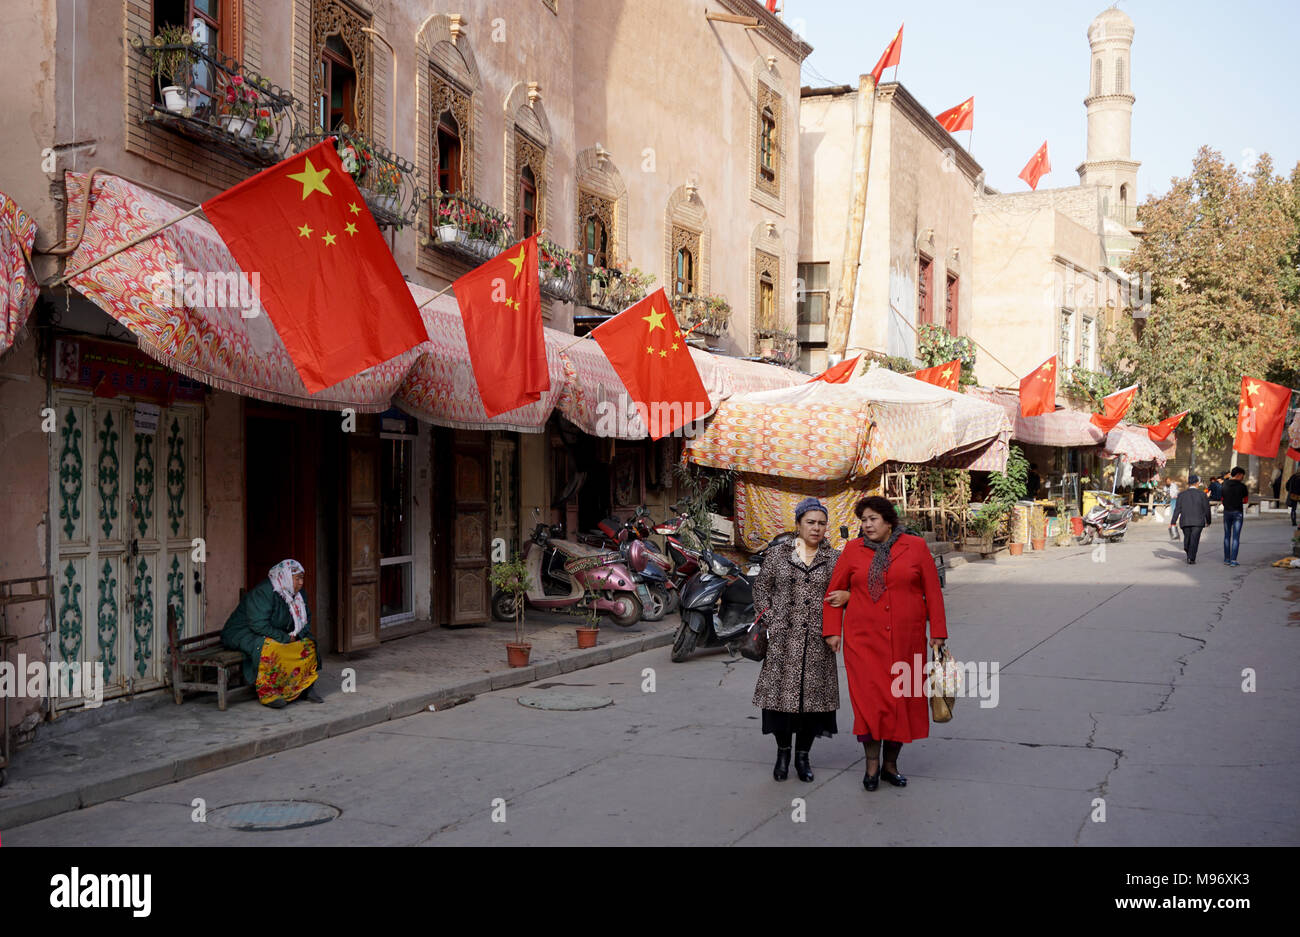 In the old town of Kashgar in Xinjiang, China Stock Photo